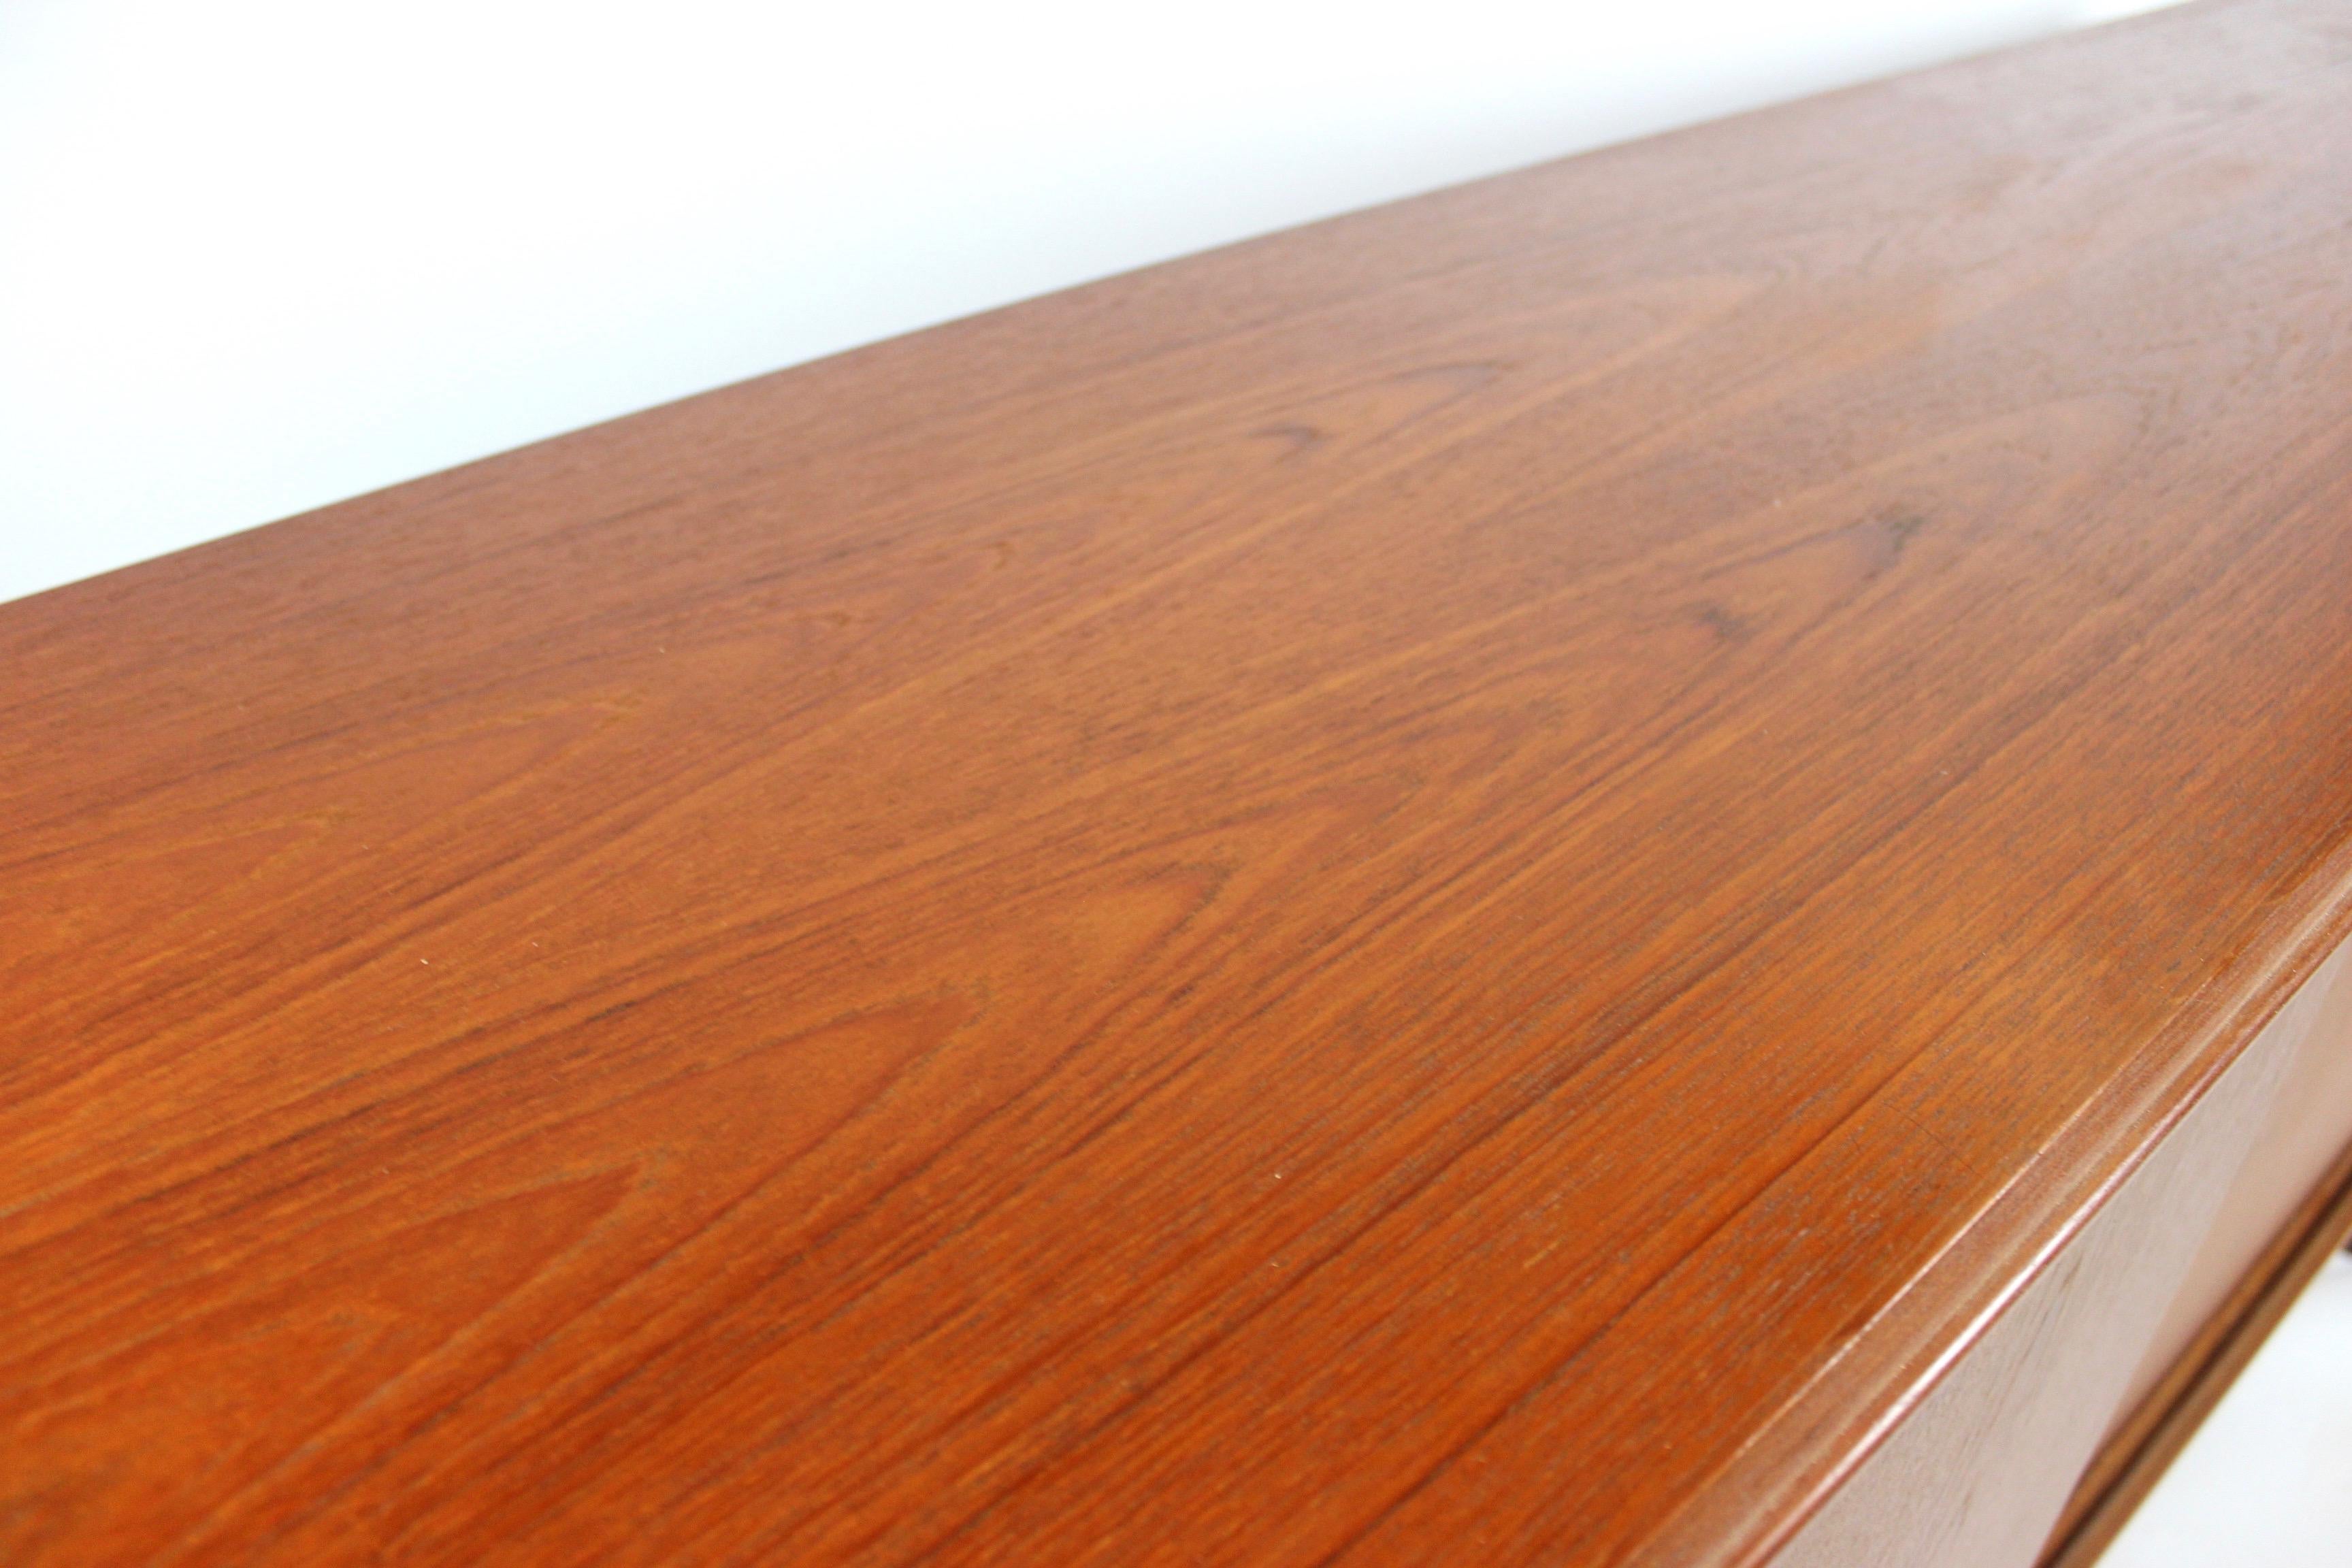 Sideboard in Teak of Danish Design from the 1960s For Sale 3